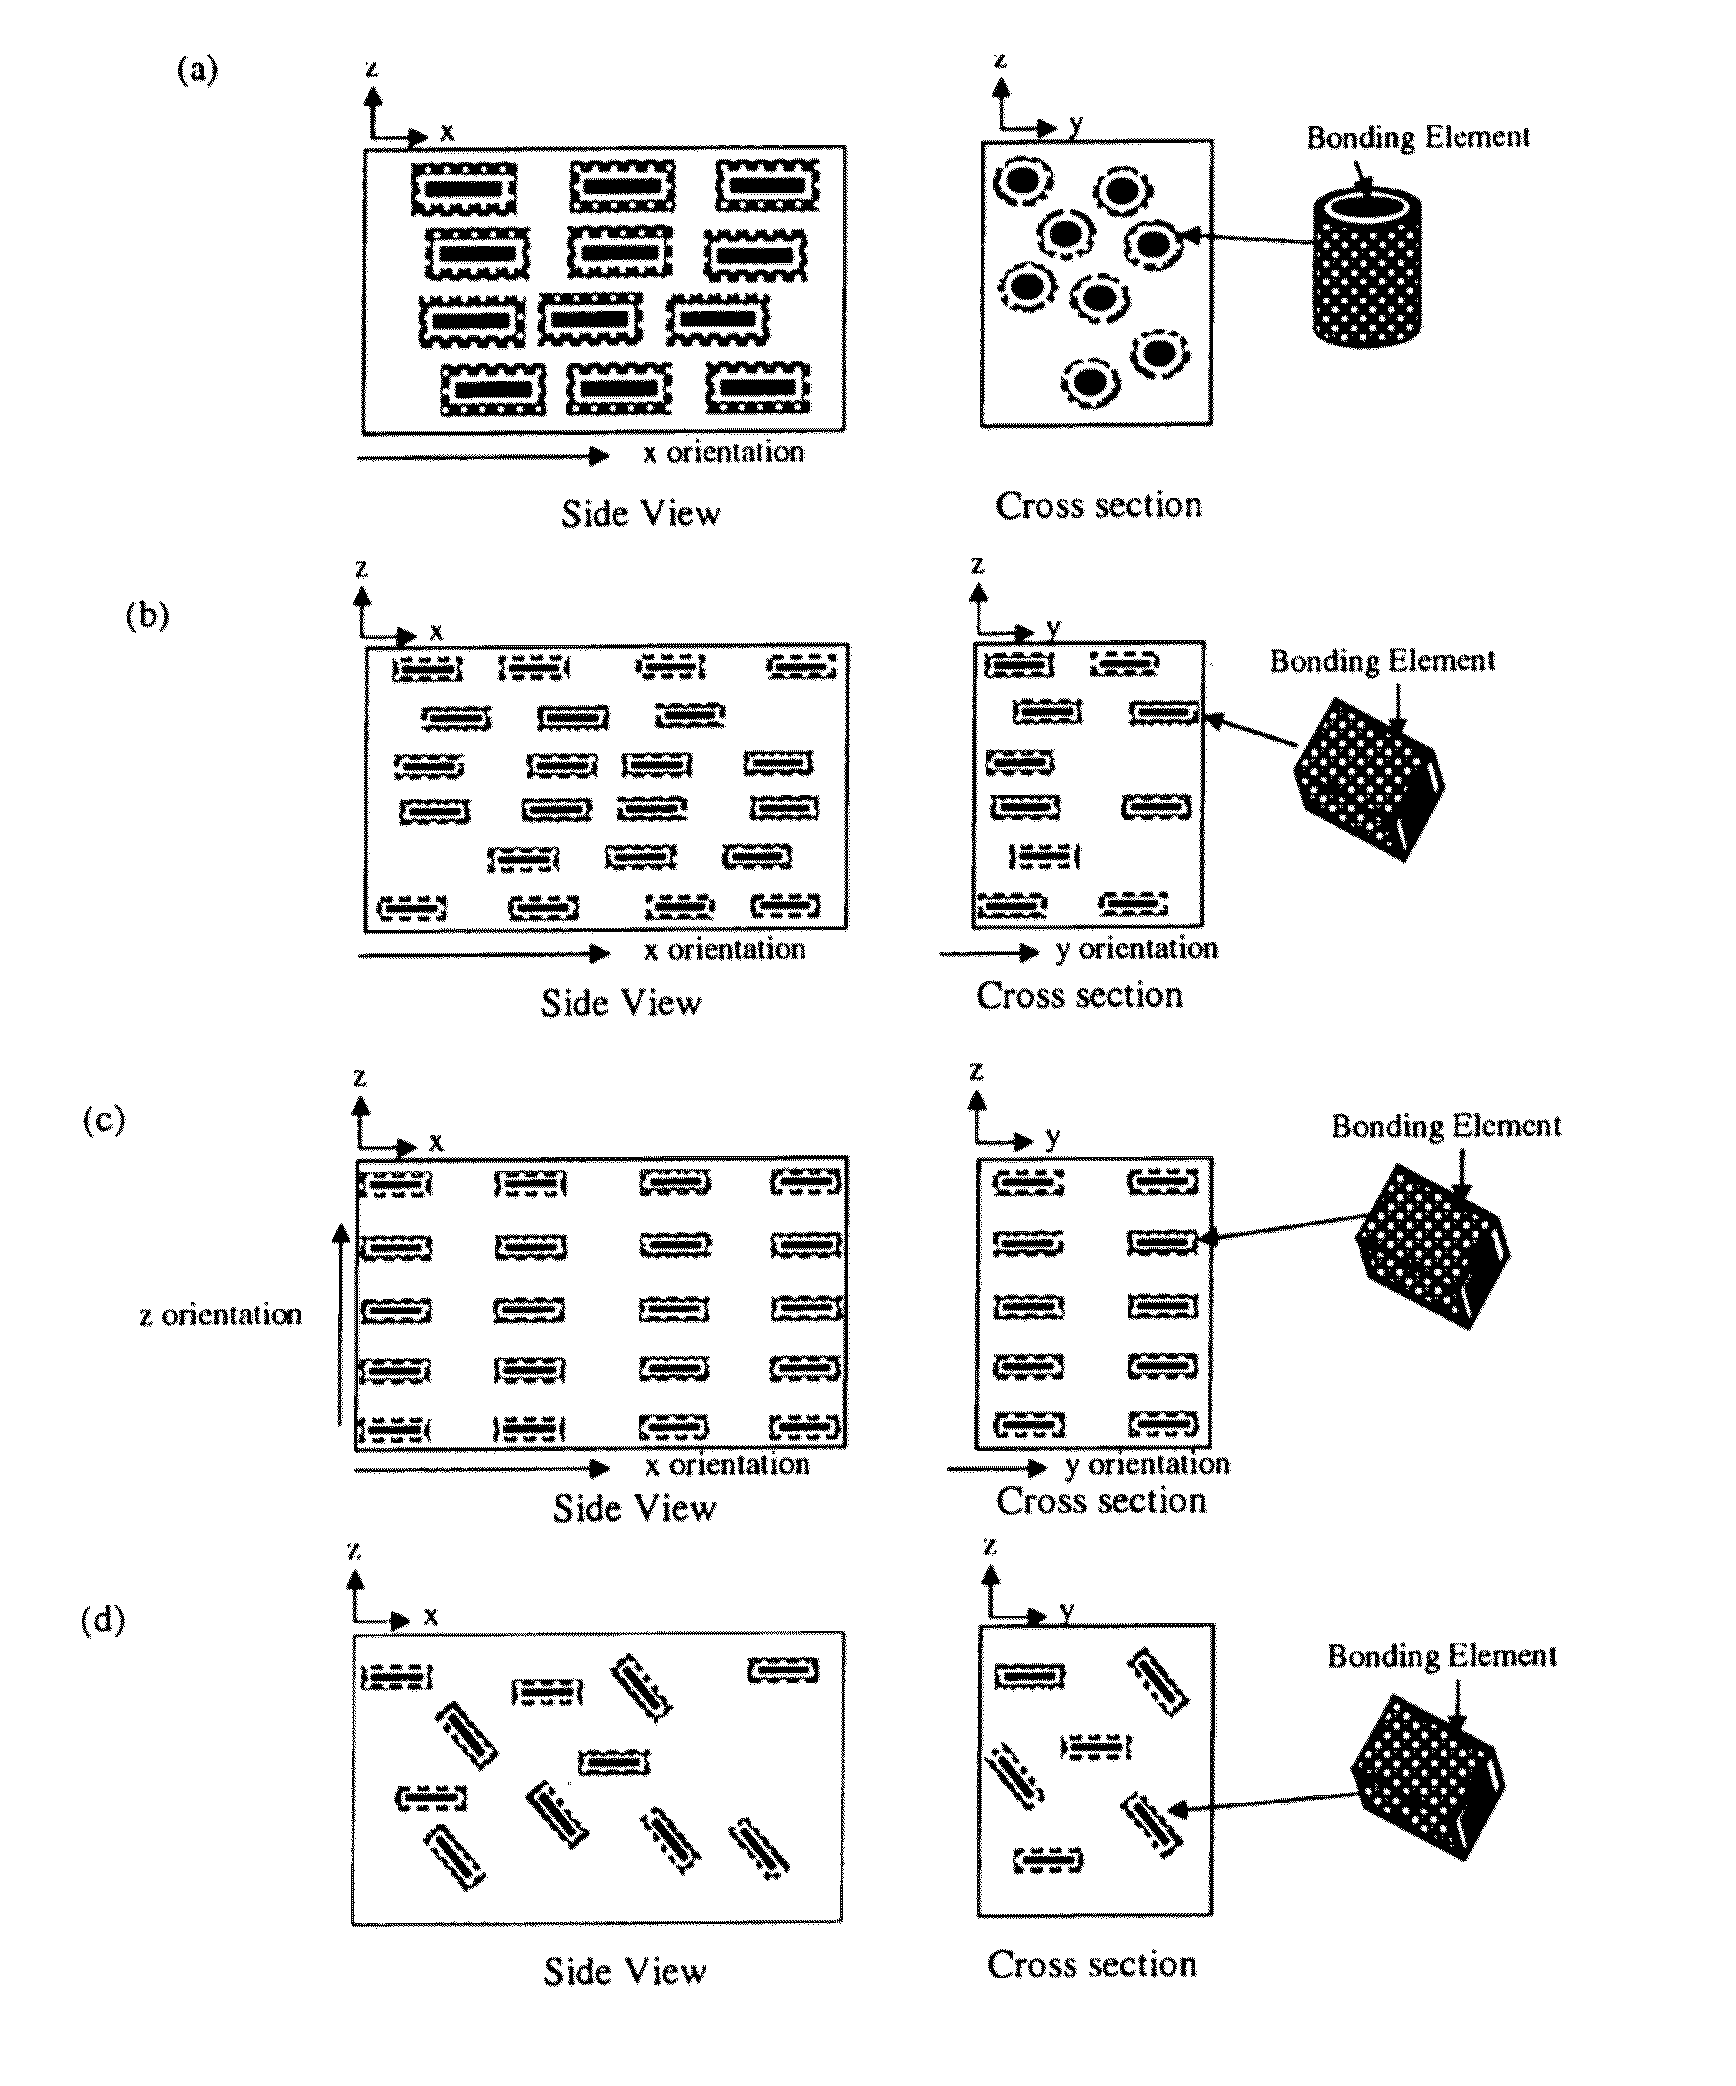 Granite-like composite materials and methods of preparation thereof